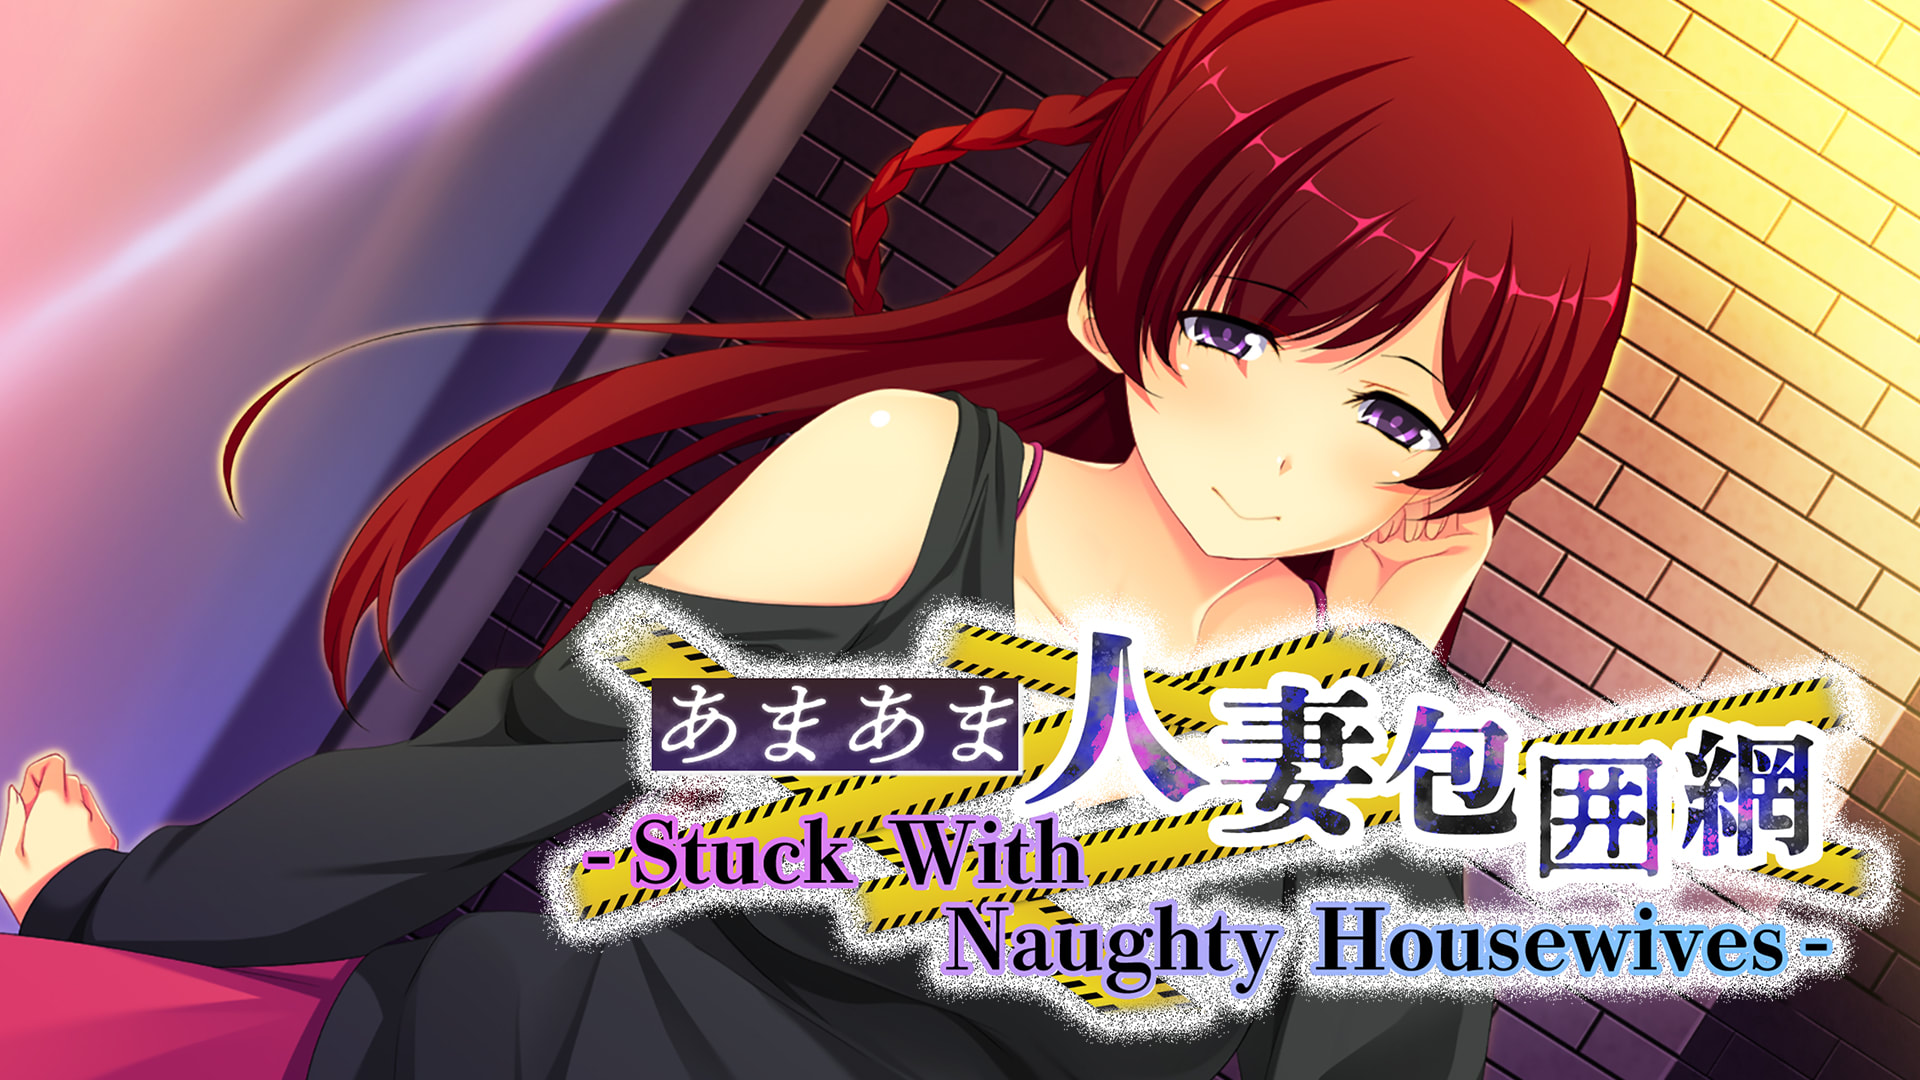 - Stuck With Naughty Housewives - あまあま人妻包囲網 1